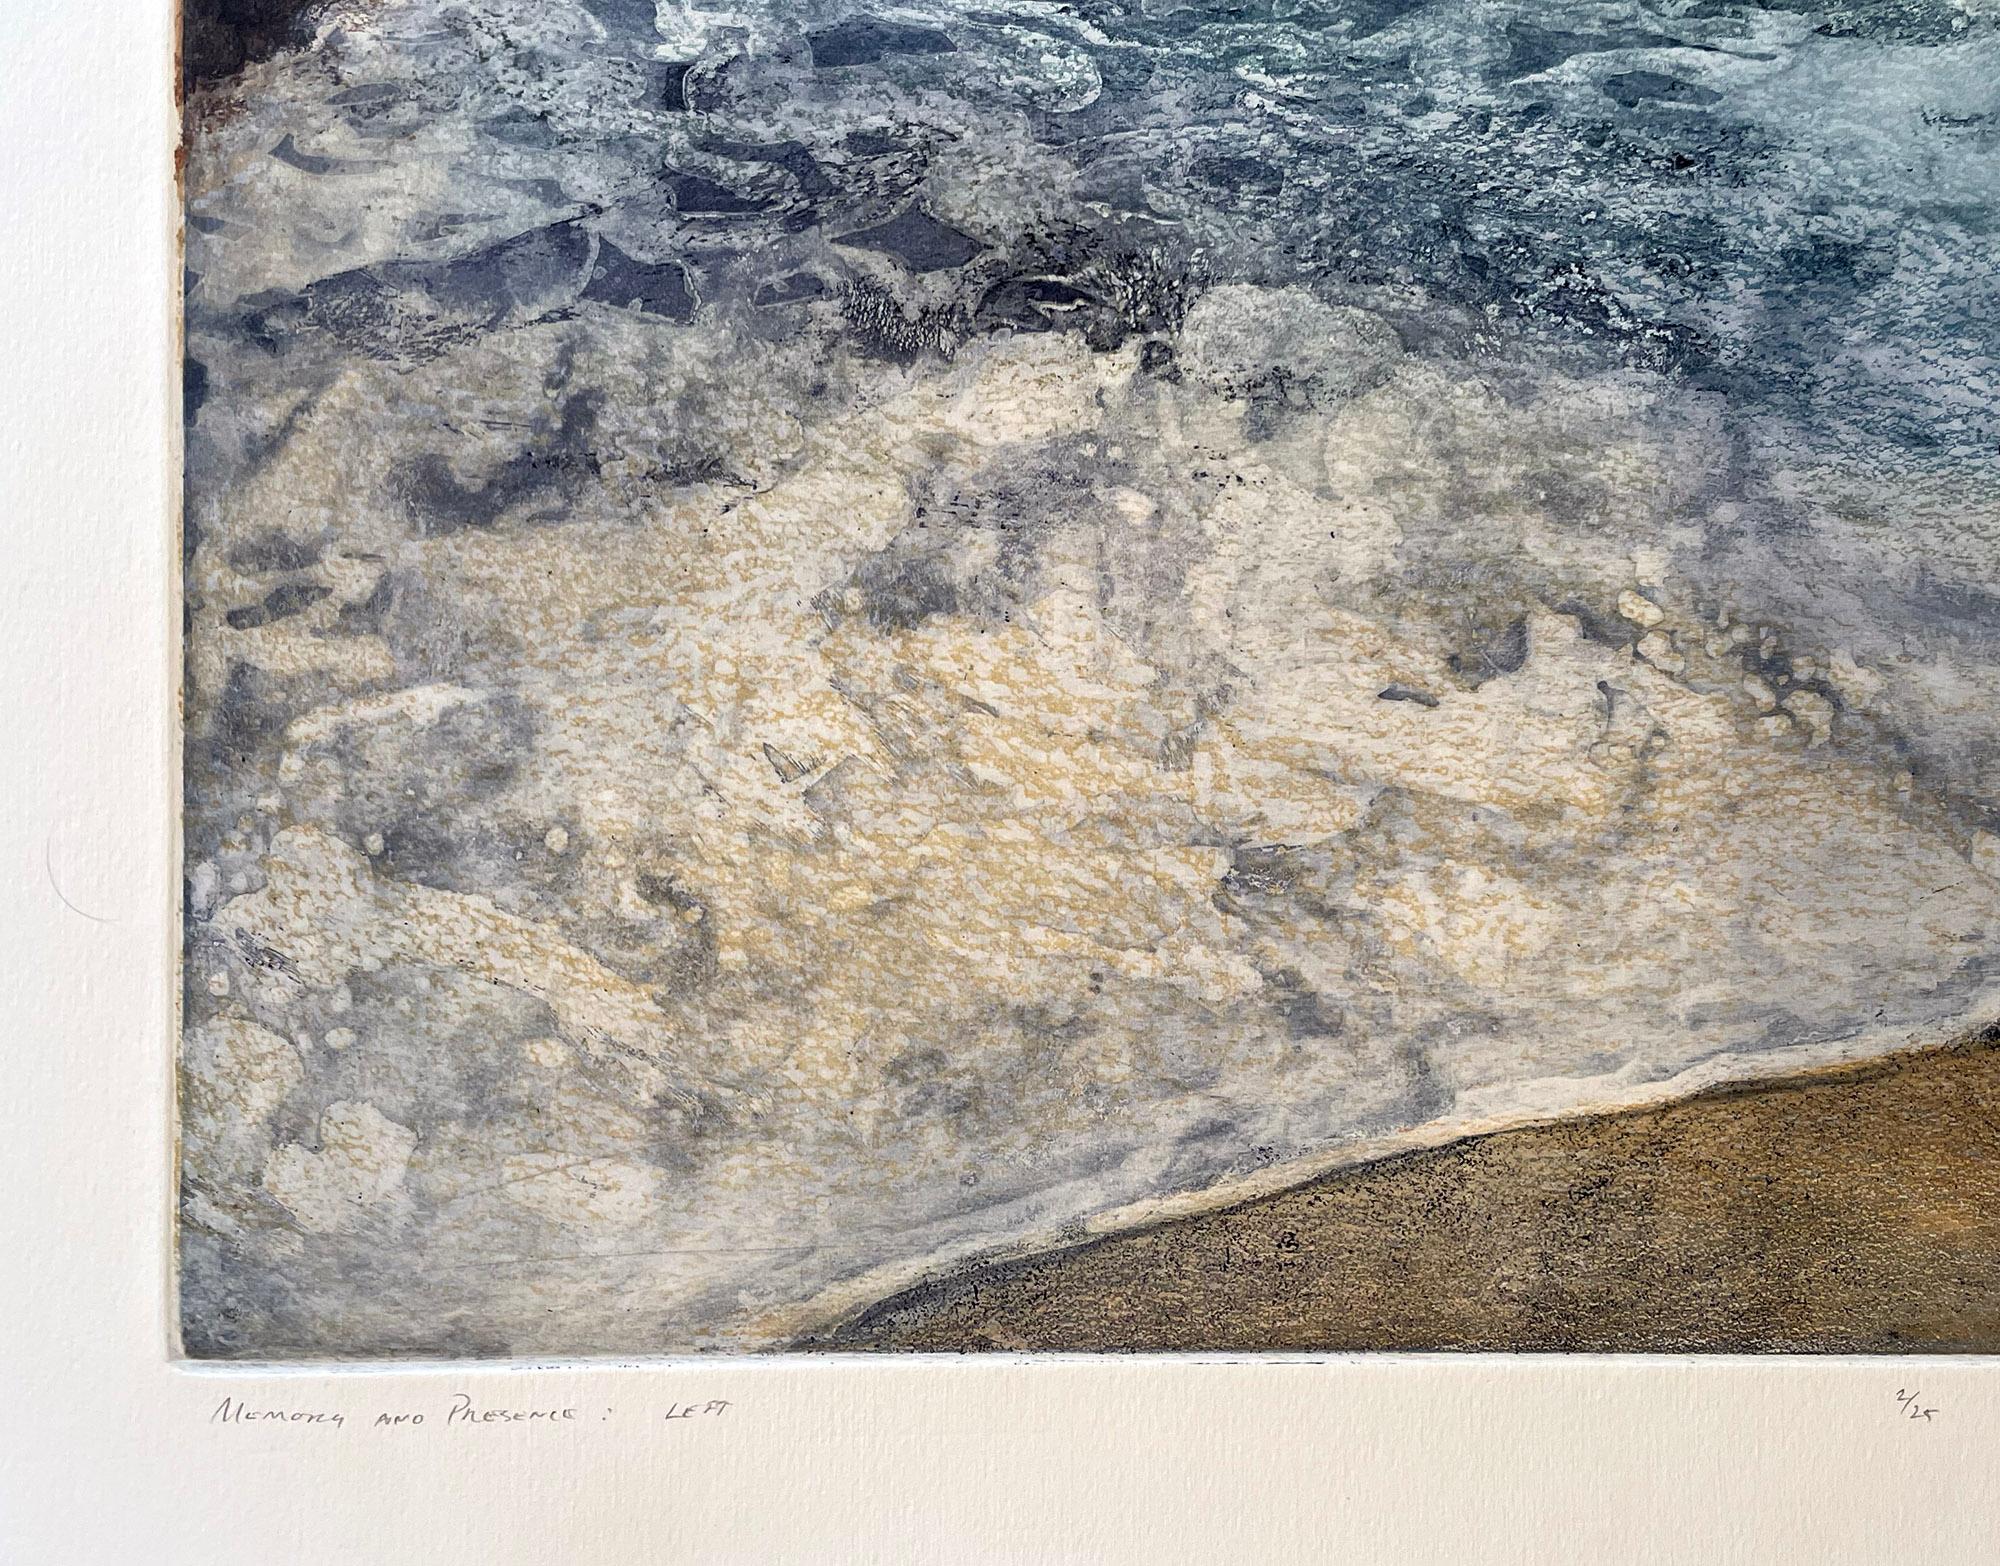 Signed, titled and numbered from the edition of 25. This is the left image in the triptych of prints titled Memory and Presence. Werger created this image of the California coastline, including part of the seascape, the cliff, and the pathway along